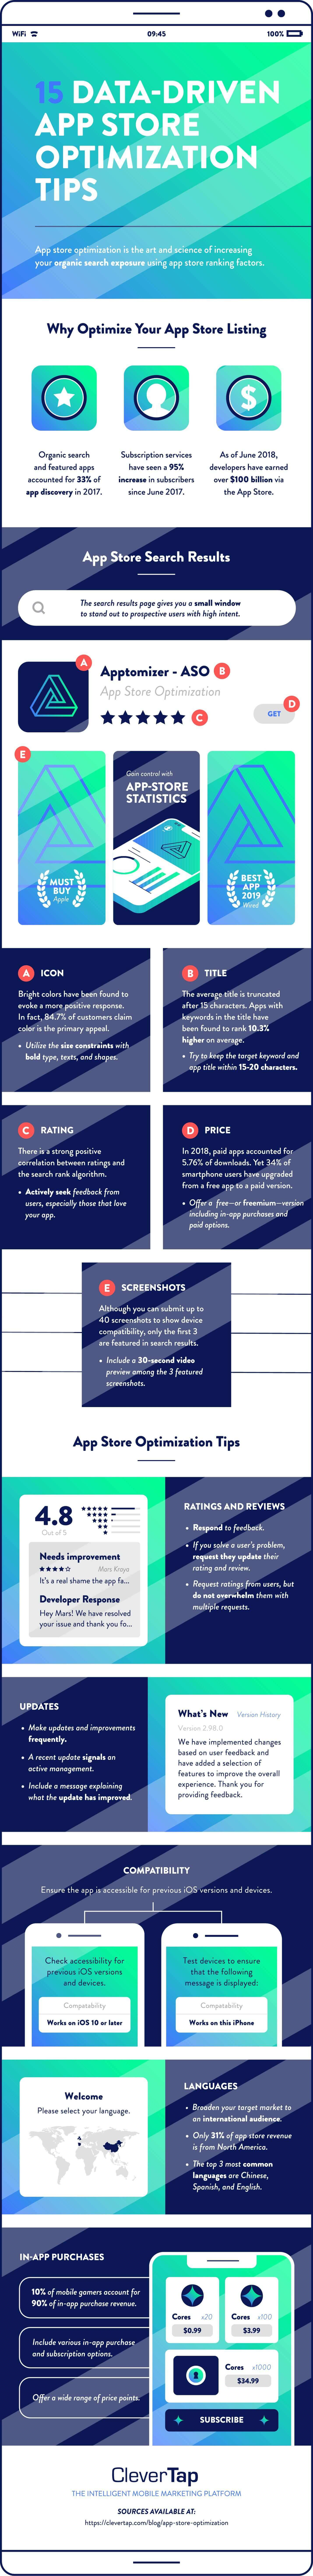 app store optimization tips infographic with examples 